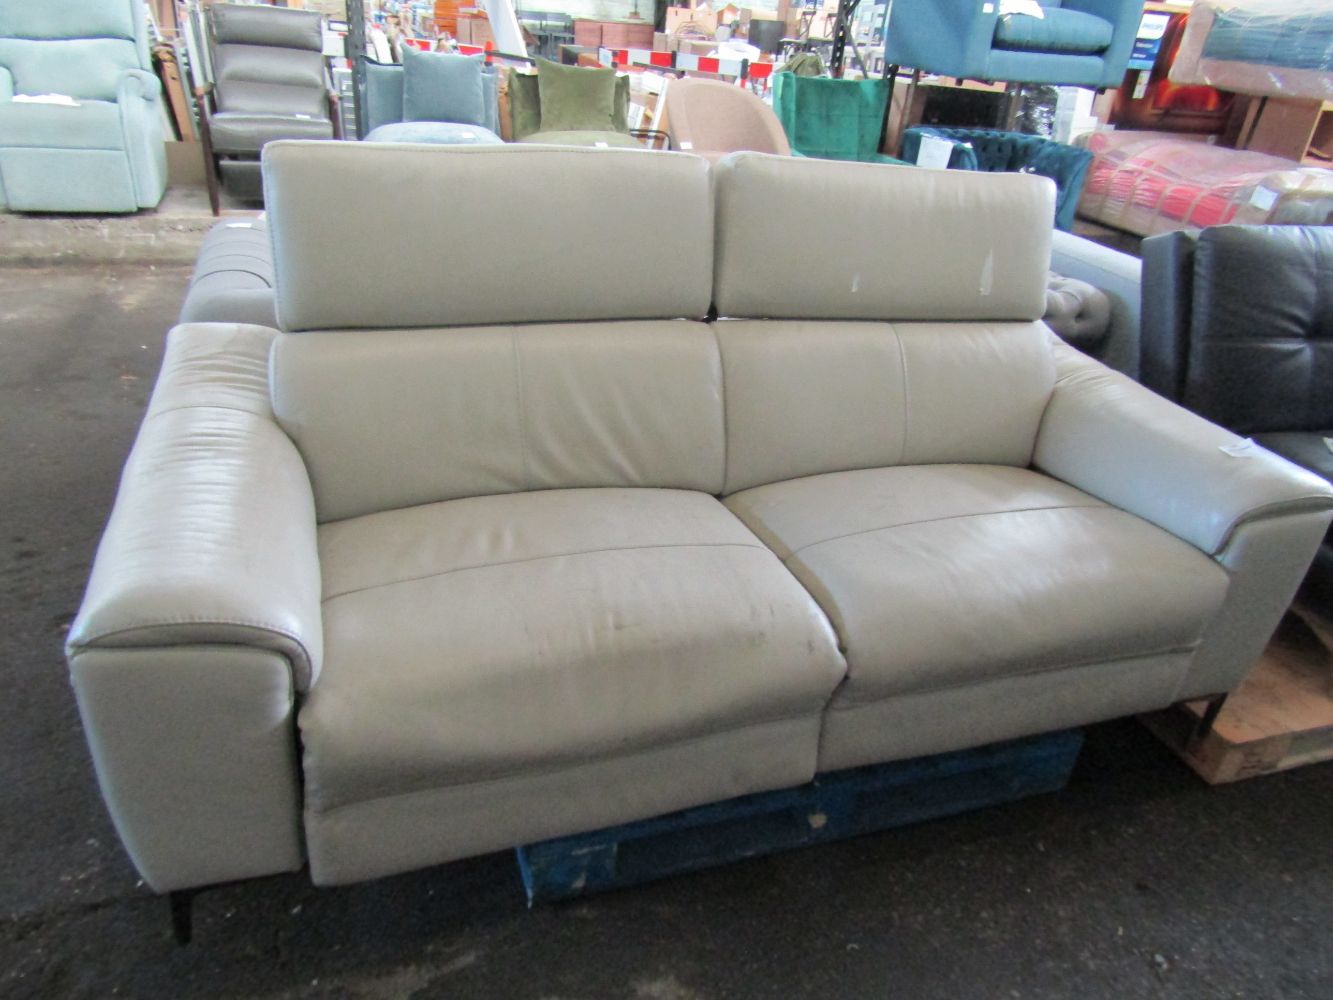 Sofas and Chairs from Costco, HSL, Swoon and more